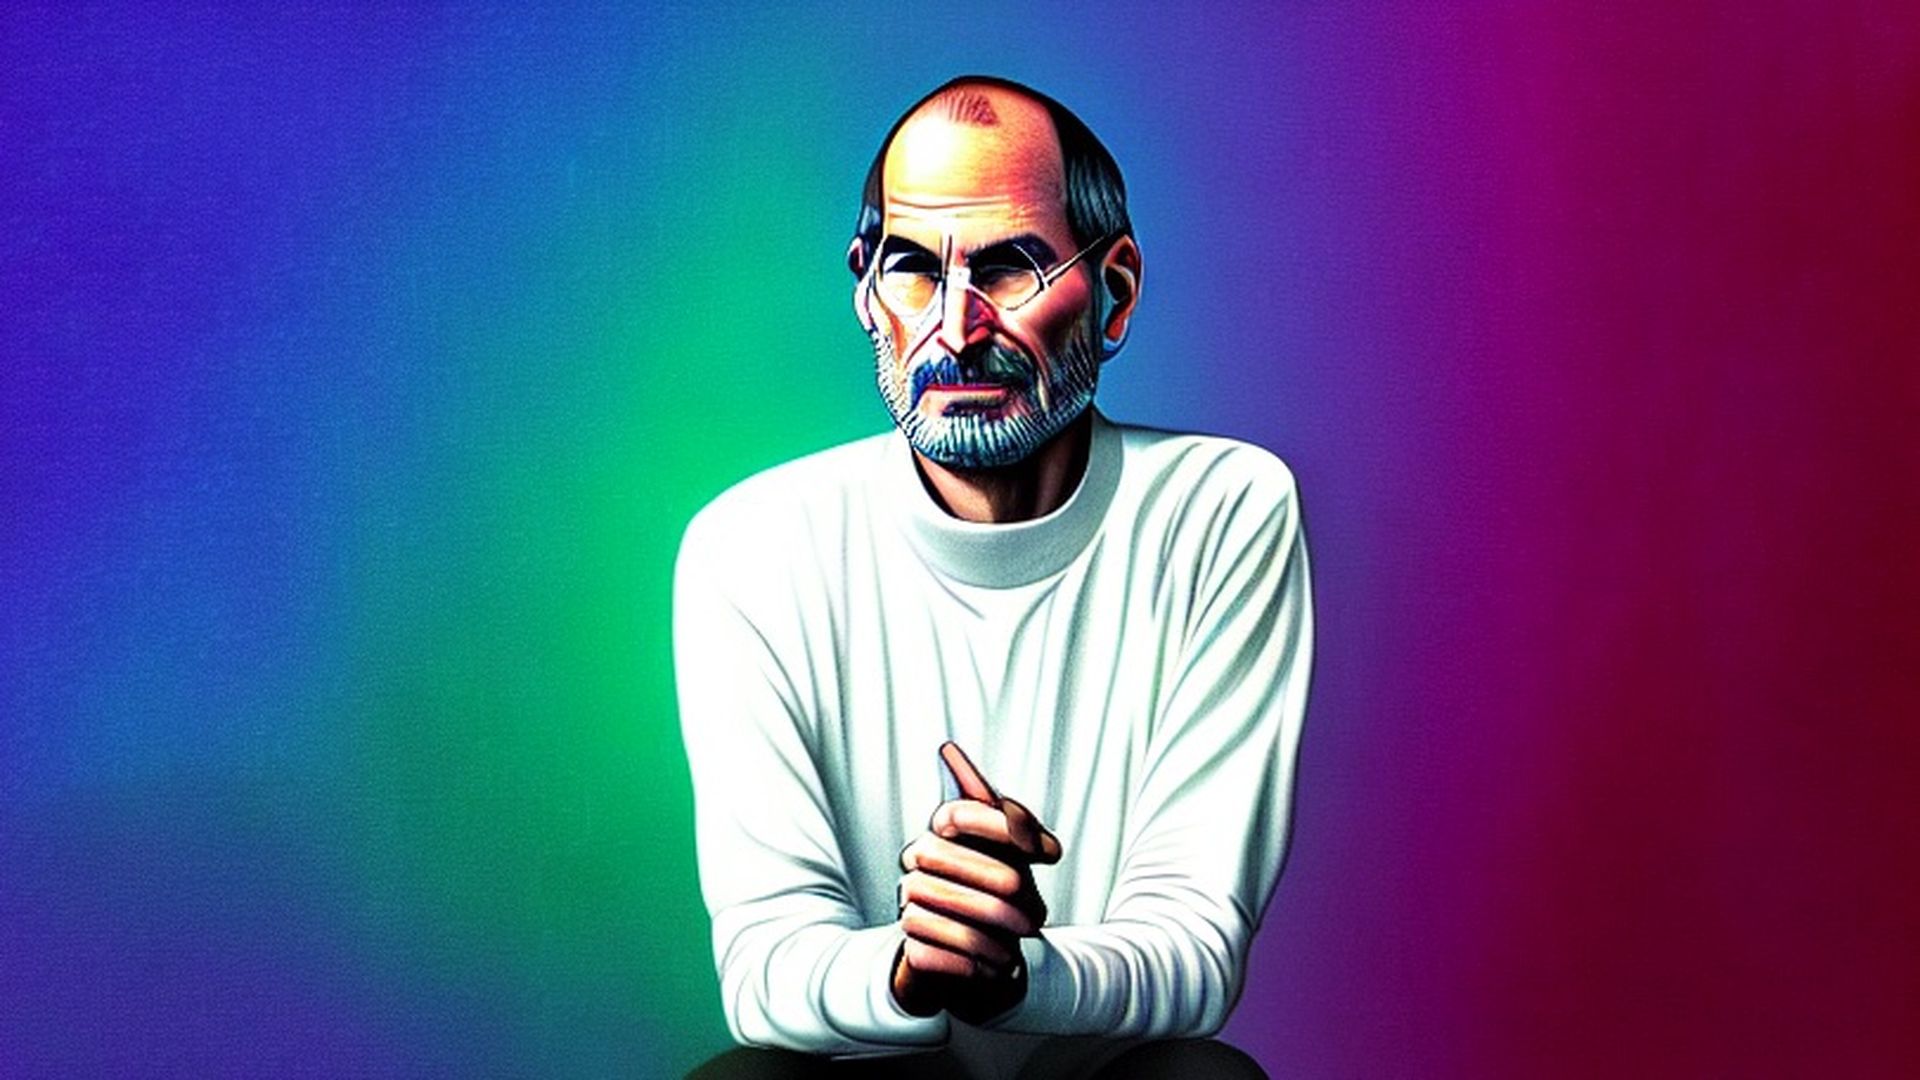 Joe Rogan Steve Jobs AI interview shocked the Internet. But how did this occur? Of course, the typical suspect in charge of weird things. Artificial...